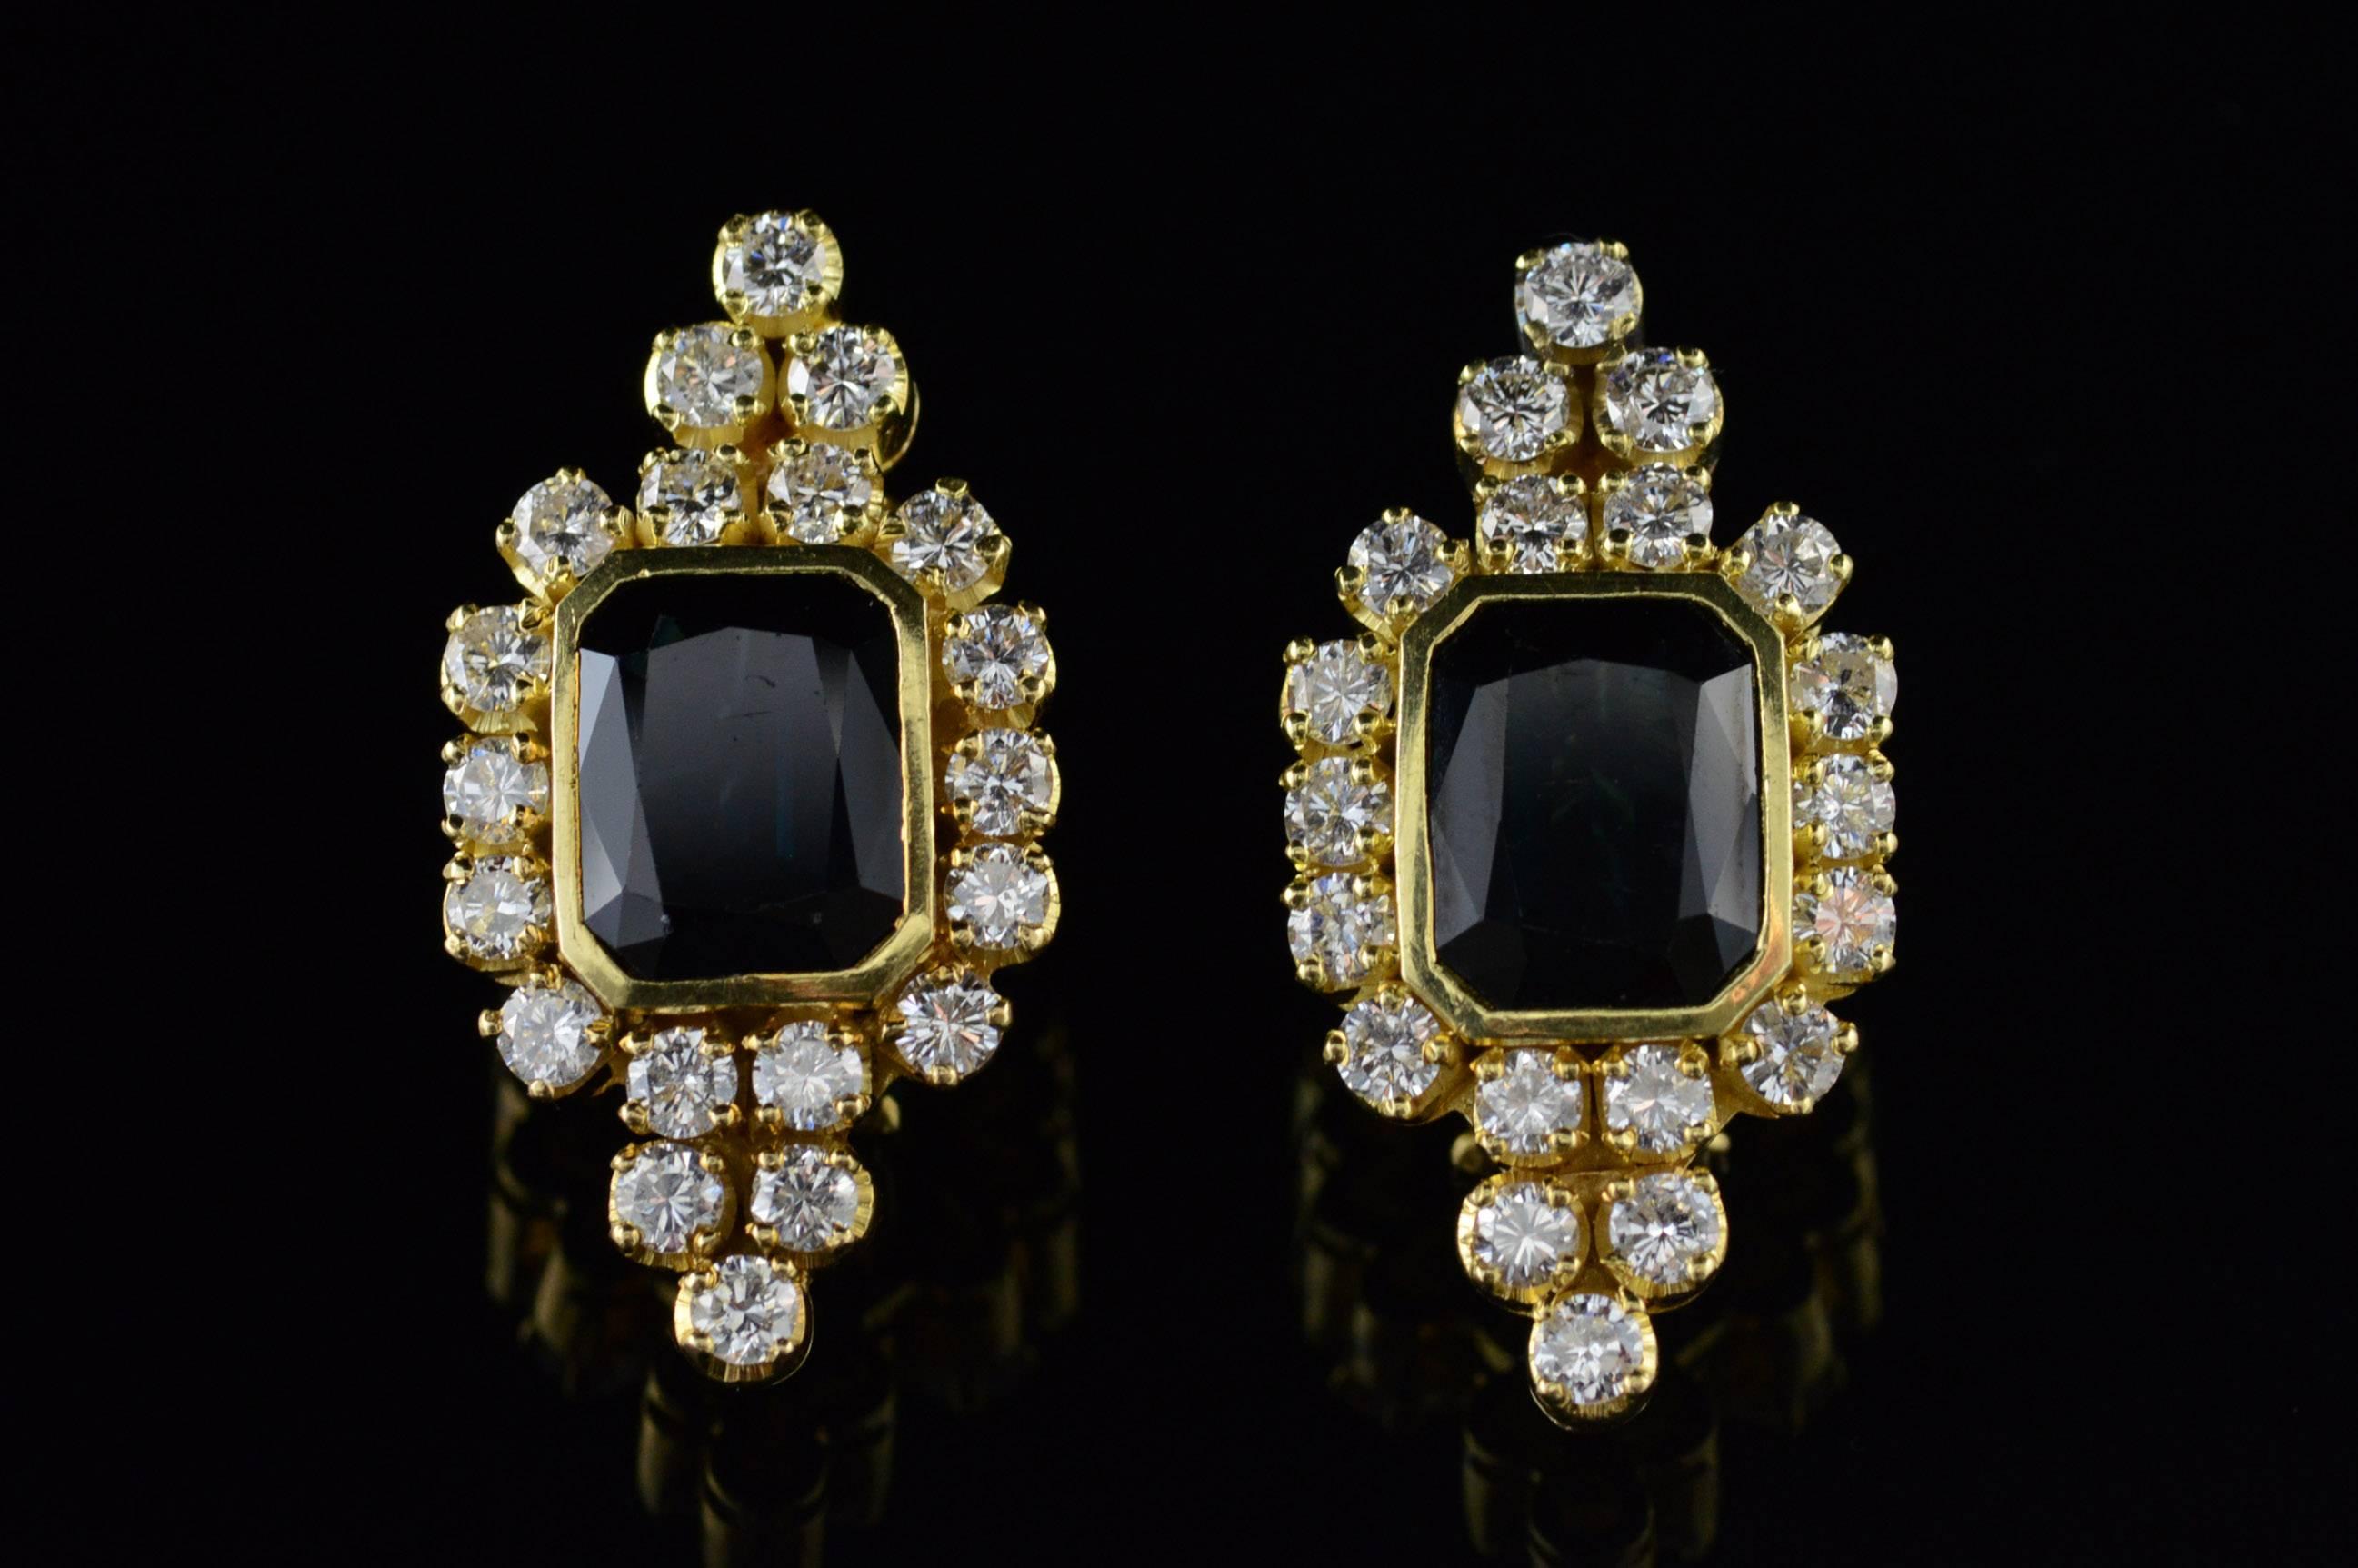  All diamonds are graded according to GIA grading standards.

·Item: 18K 5.74 Ctw Sapphire 2.00 G/VS-SI Ctw Diamond French Clip Earrings Yellow Gold

·Era: Vintage / 1950s

·Composition: 18k Gold Marked/Tested

·Gem Stone: 2x Sapphires=5.74Ctw, 20x